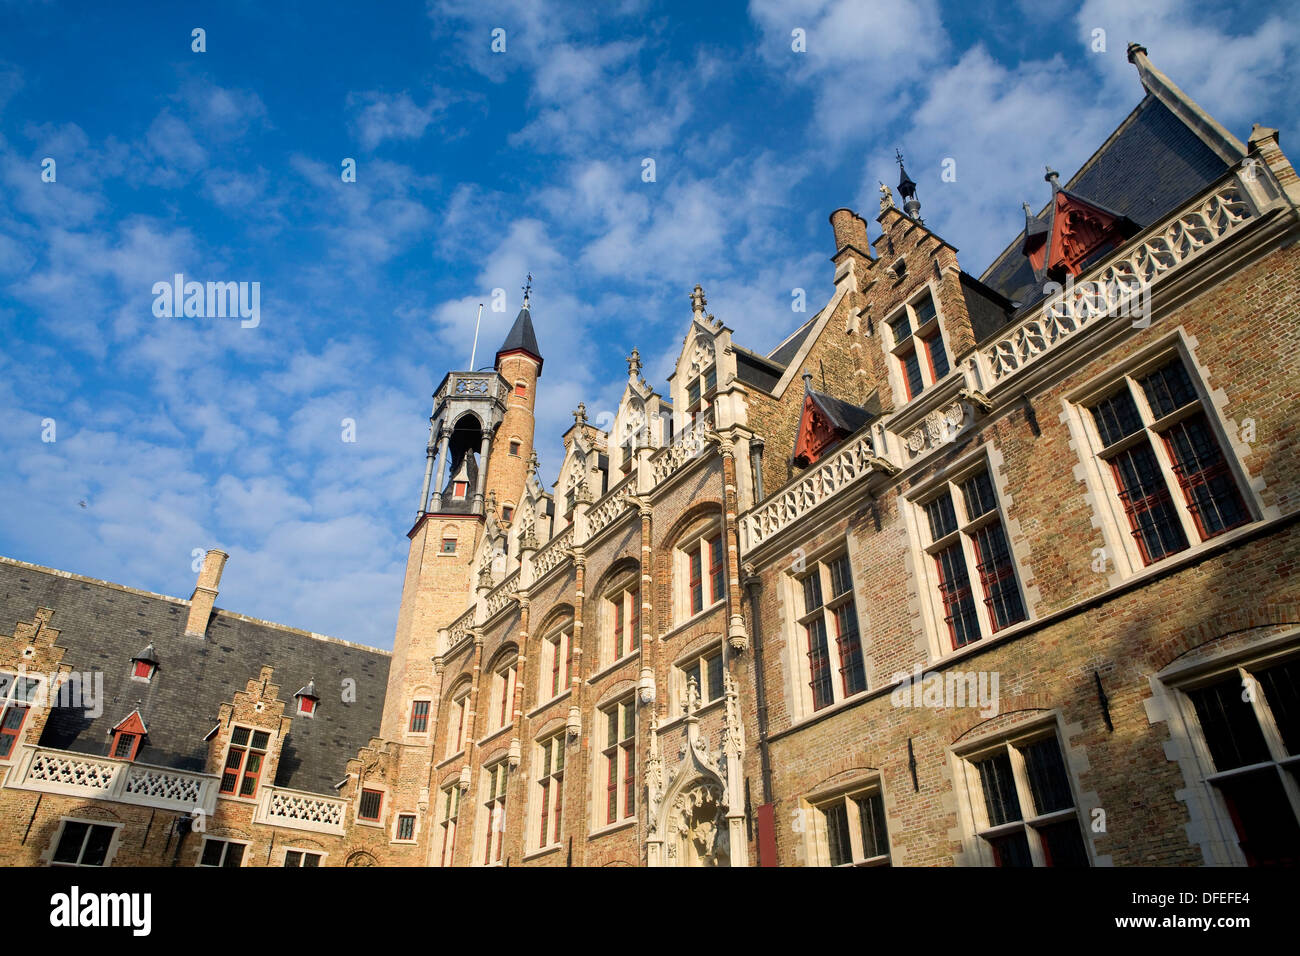 Gruuthuse Museum, in the medieval town of Brugge, listed World Heritage Site by UNESCO  Flanders  Belgium Stock Photo